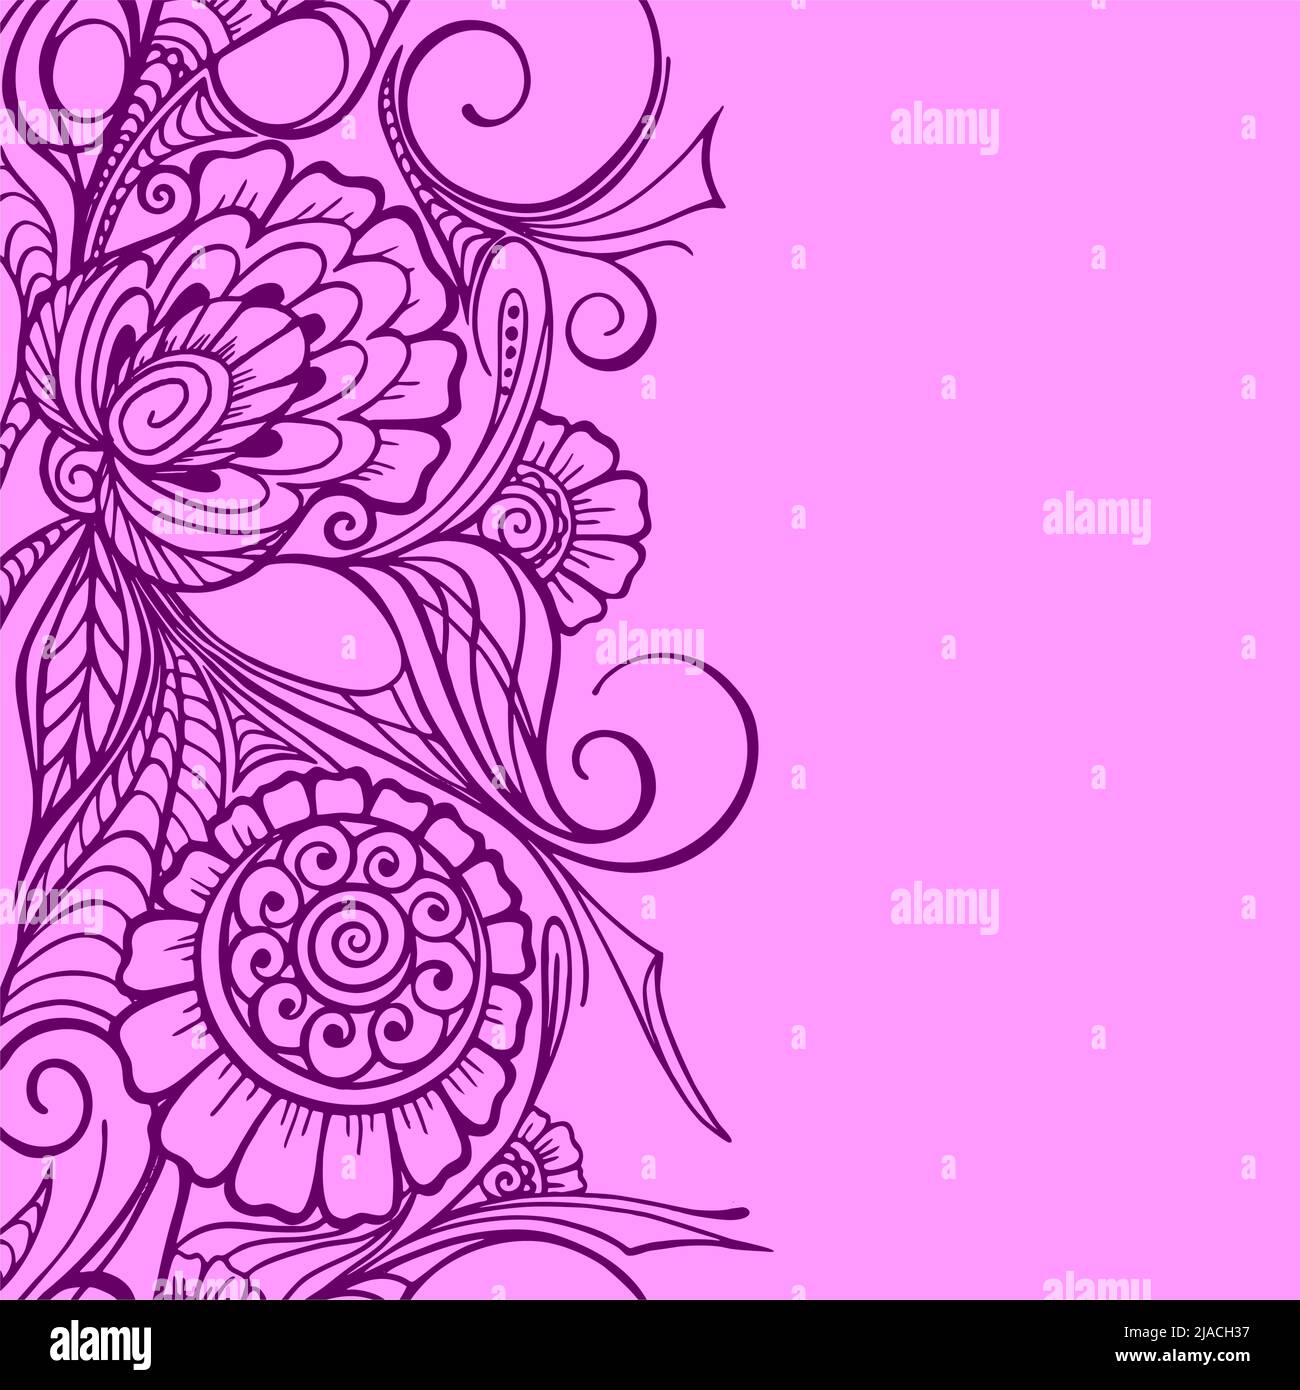 Seamless pink lace vector image on VectorStock